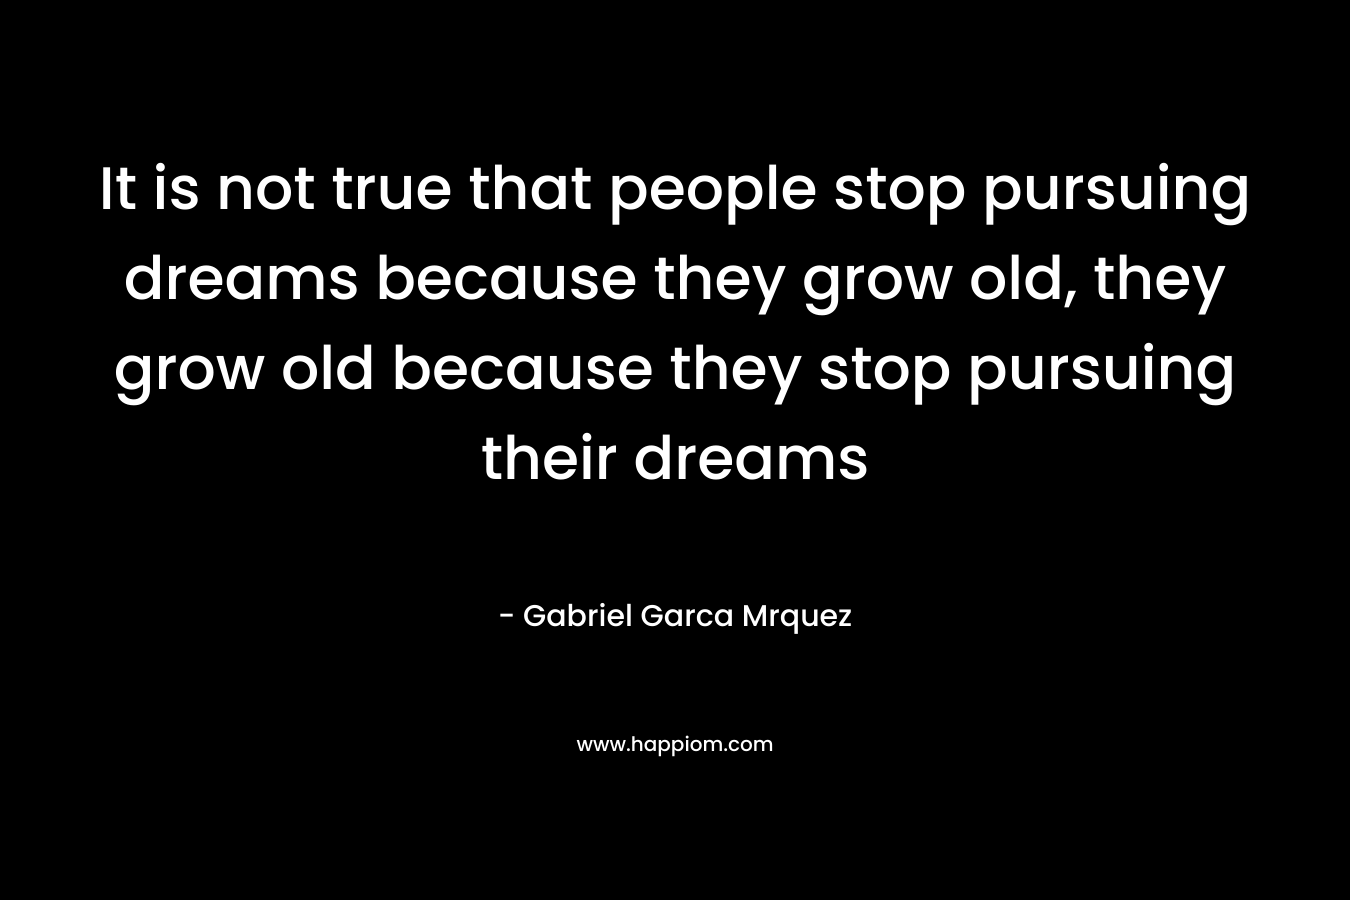 It is not true that people stop pursuing dreams because they grow old, they grow old because they stop pursuing their dreams – Gabriel Garca Mrquez